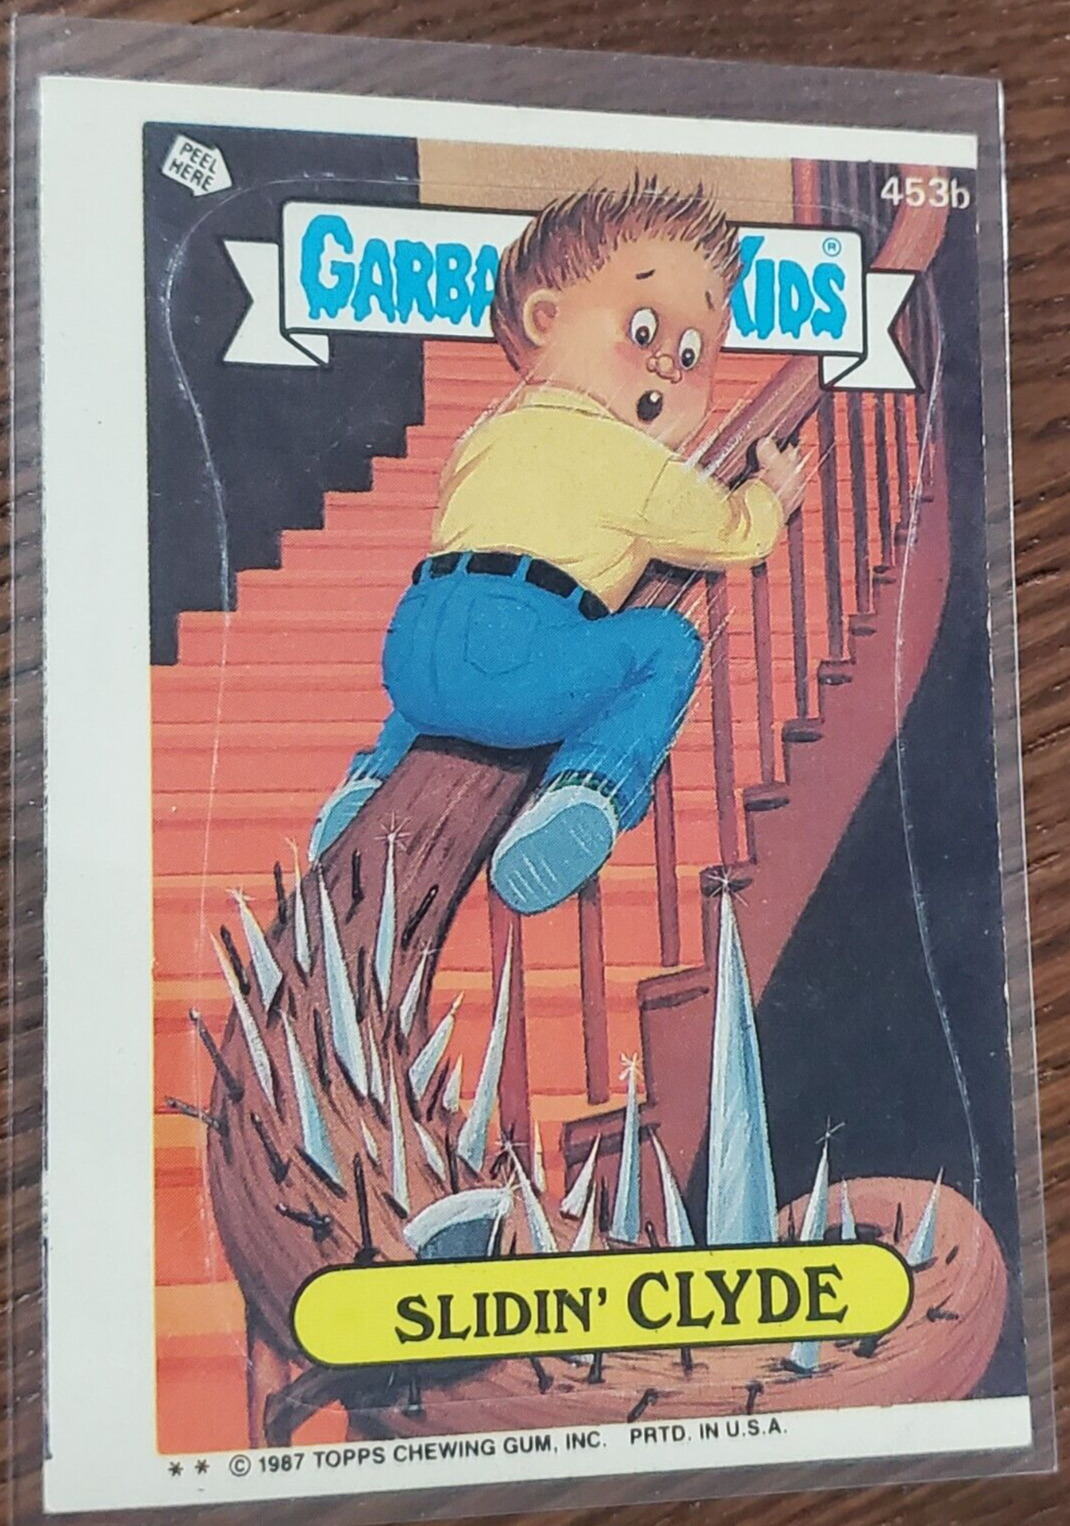 1987 Topps Garbage Pail Kids 11th Series MISCUT Slidin\' Clyde 453b